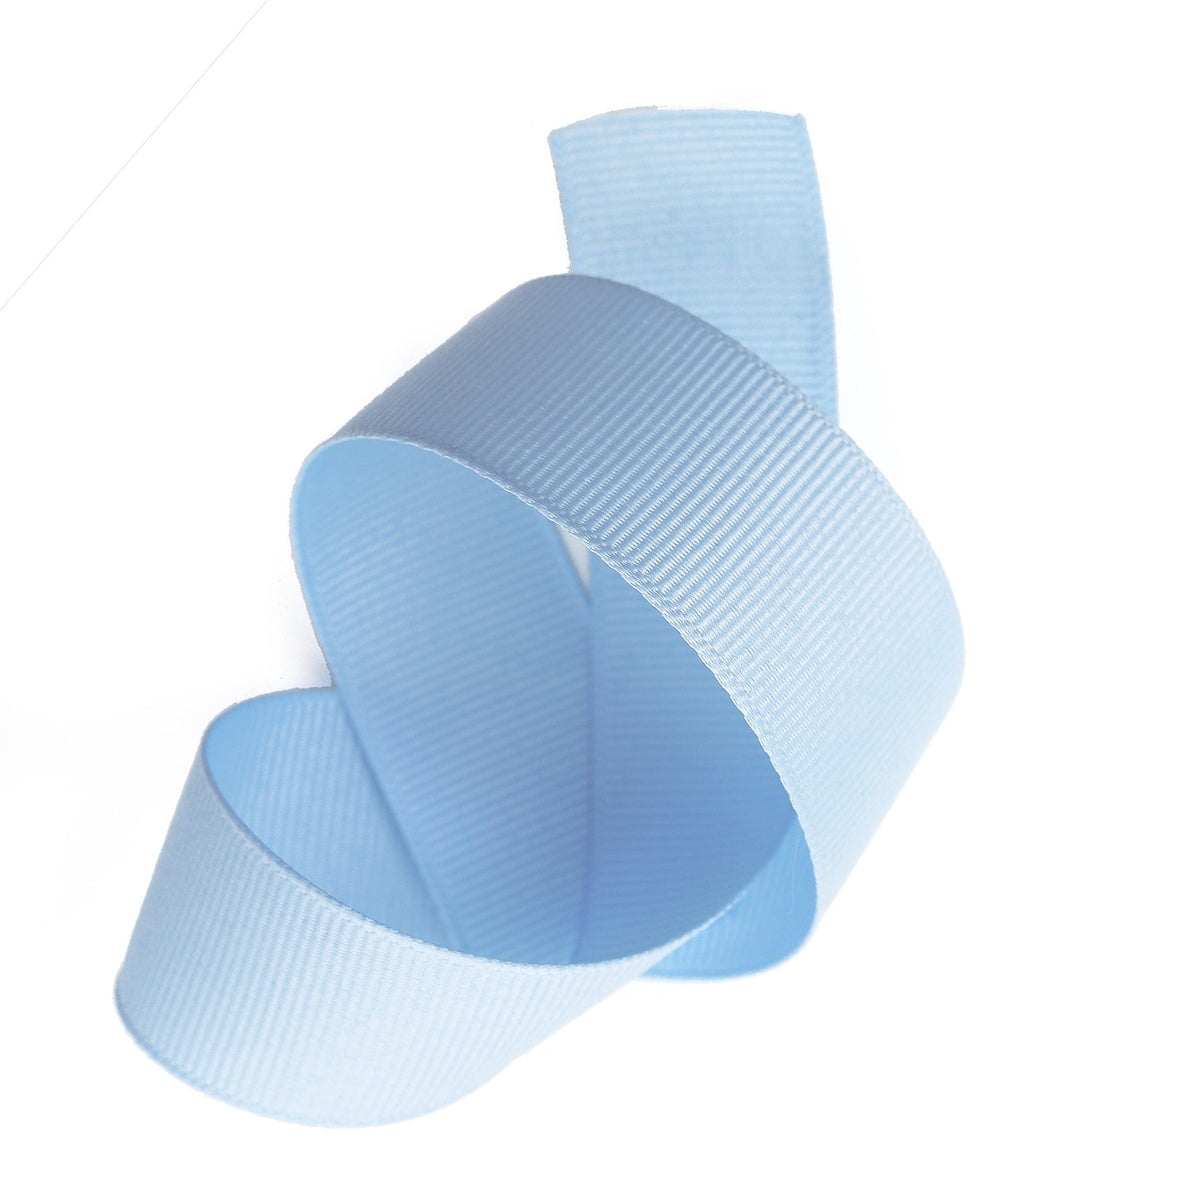 Baby blue grosgrain ribbon color matching gift box 